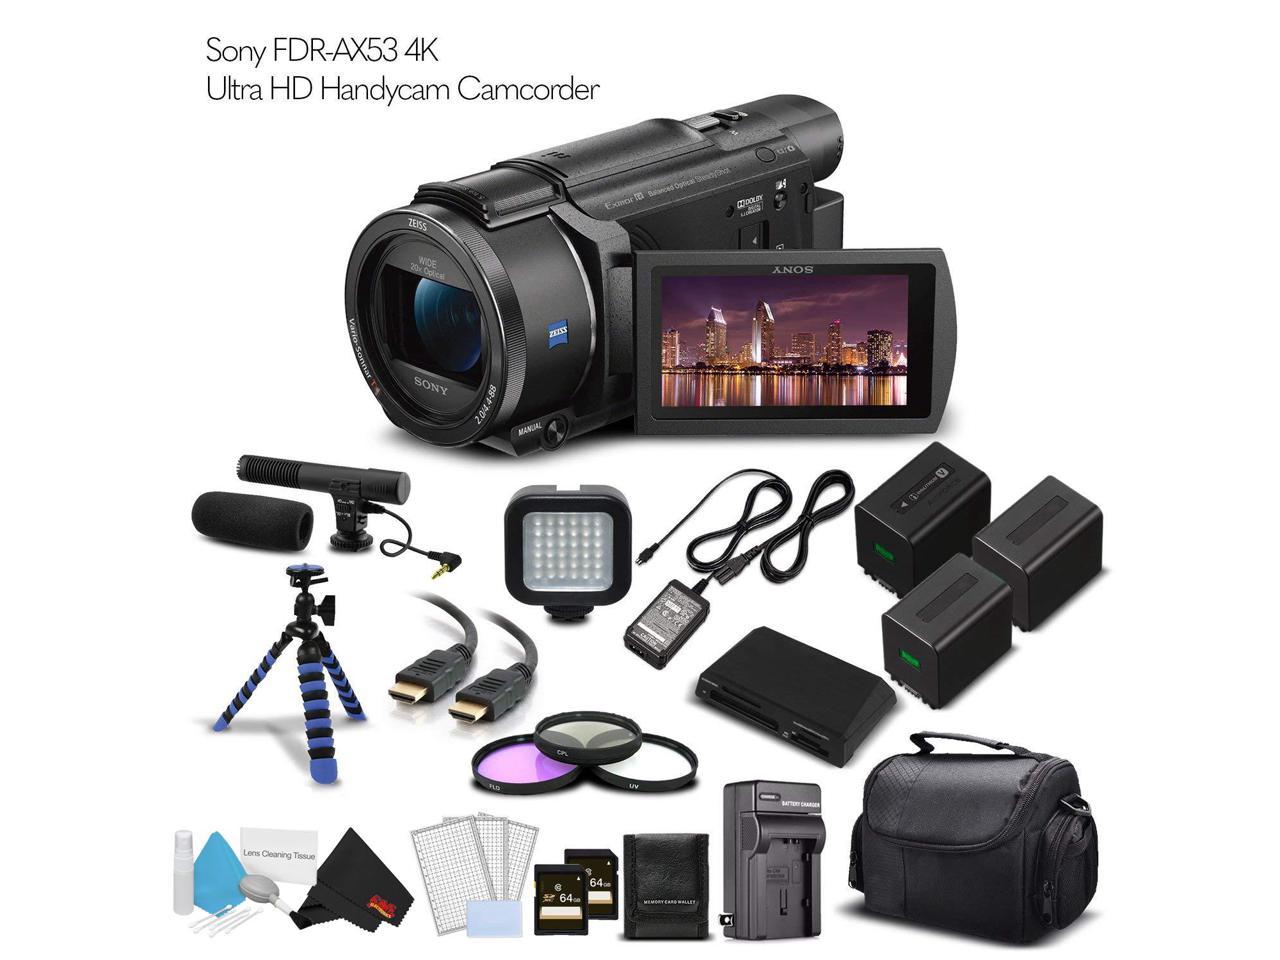 Sony FDR-AX53 4K Ultra HD Handycam Camcorder (Intl Model) 2 Extra Batteries + Case + 2 64GB Memory Cards + Tripod + Light and Microphone - Professional Bundle